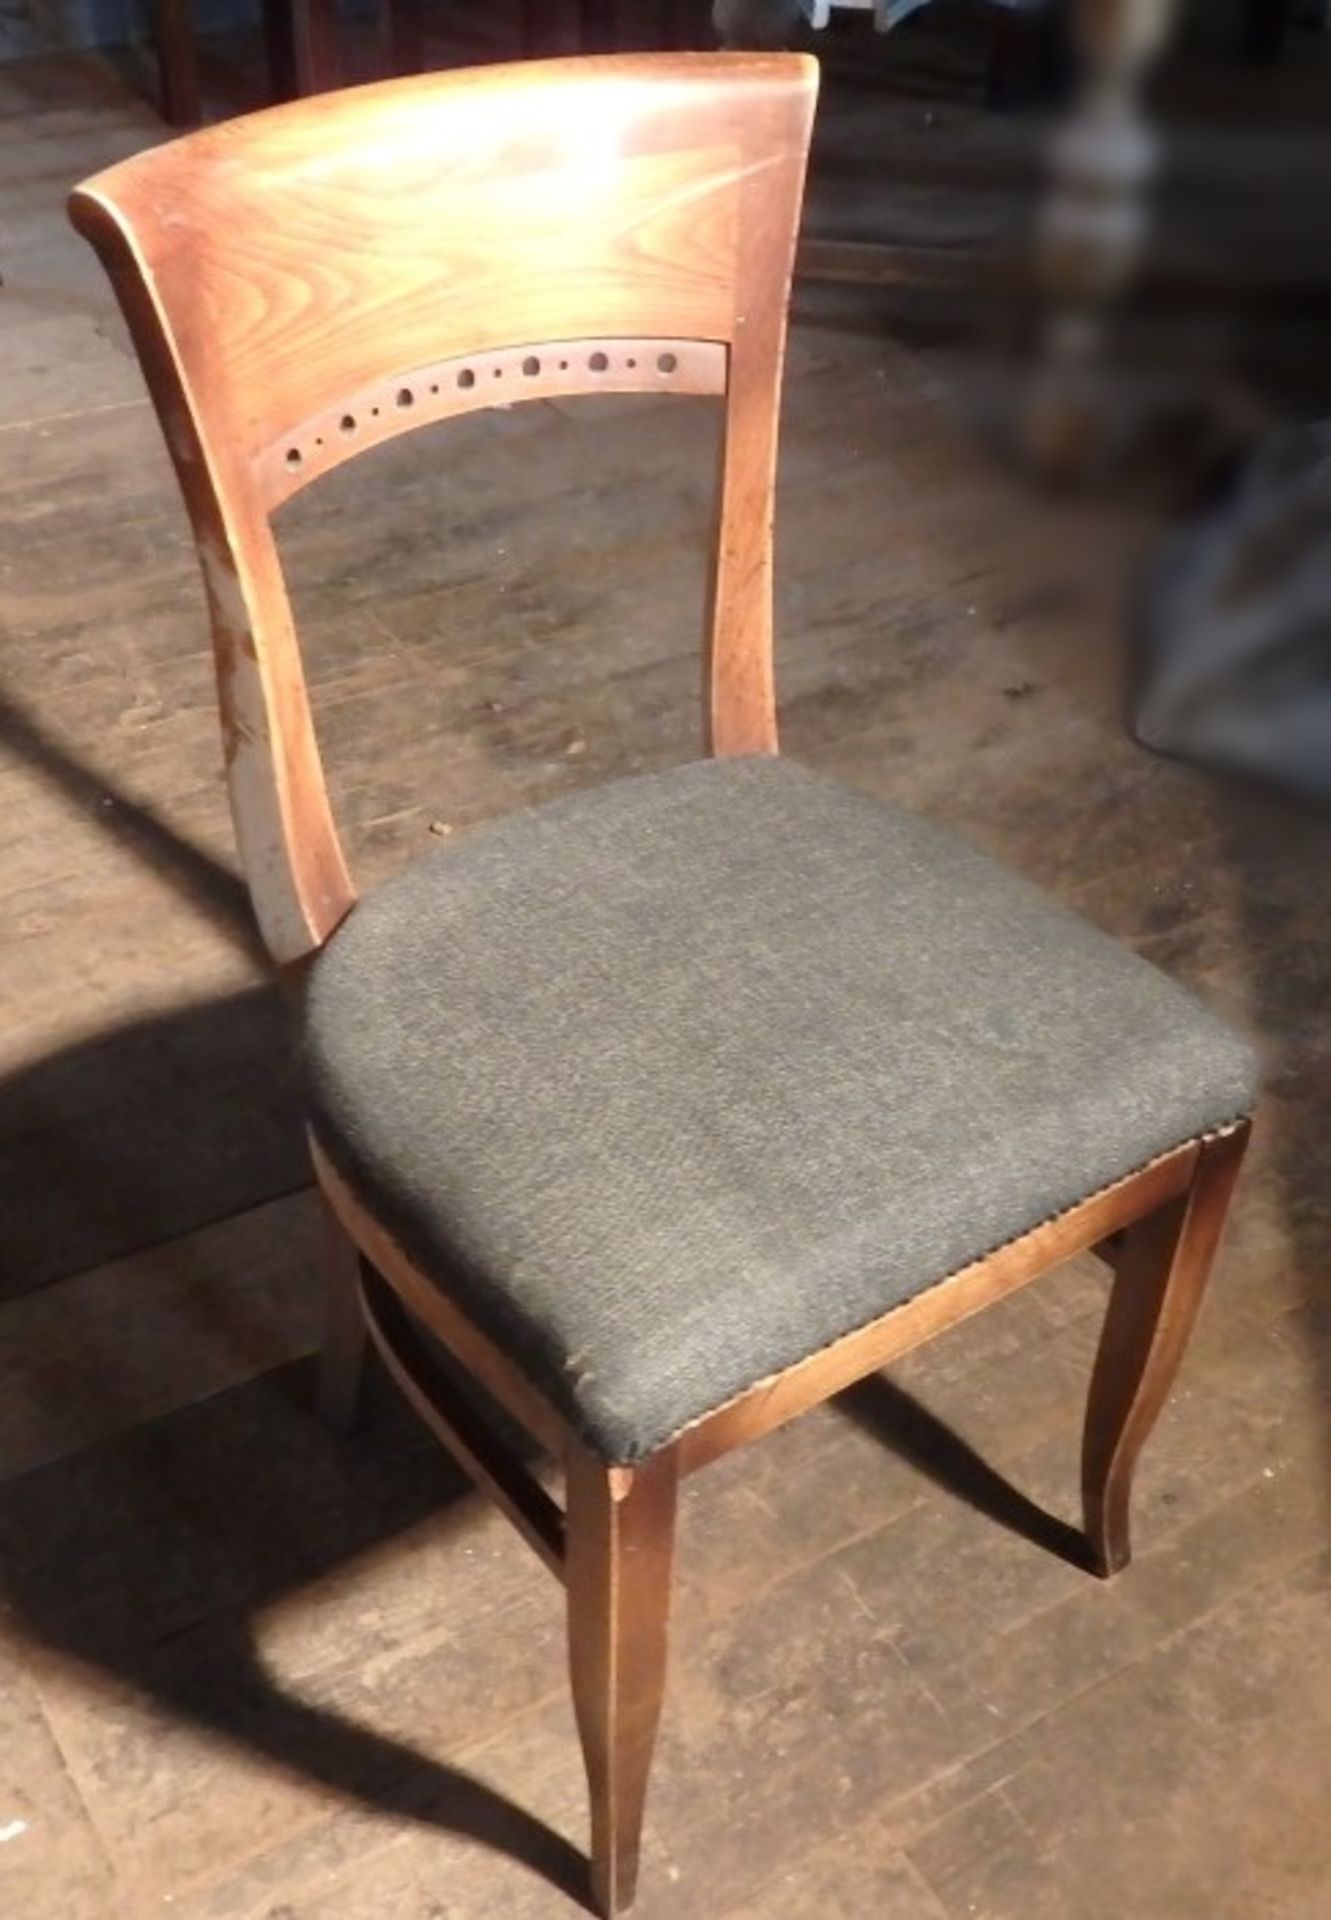 2 x Bistro Chairs - Both Recently Taken From A Bar & Restaurant Environment - Ref: NDE081C - CL122 -